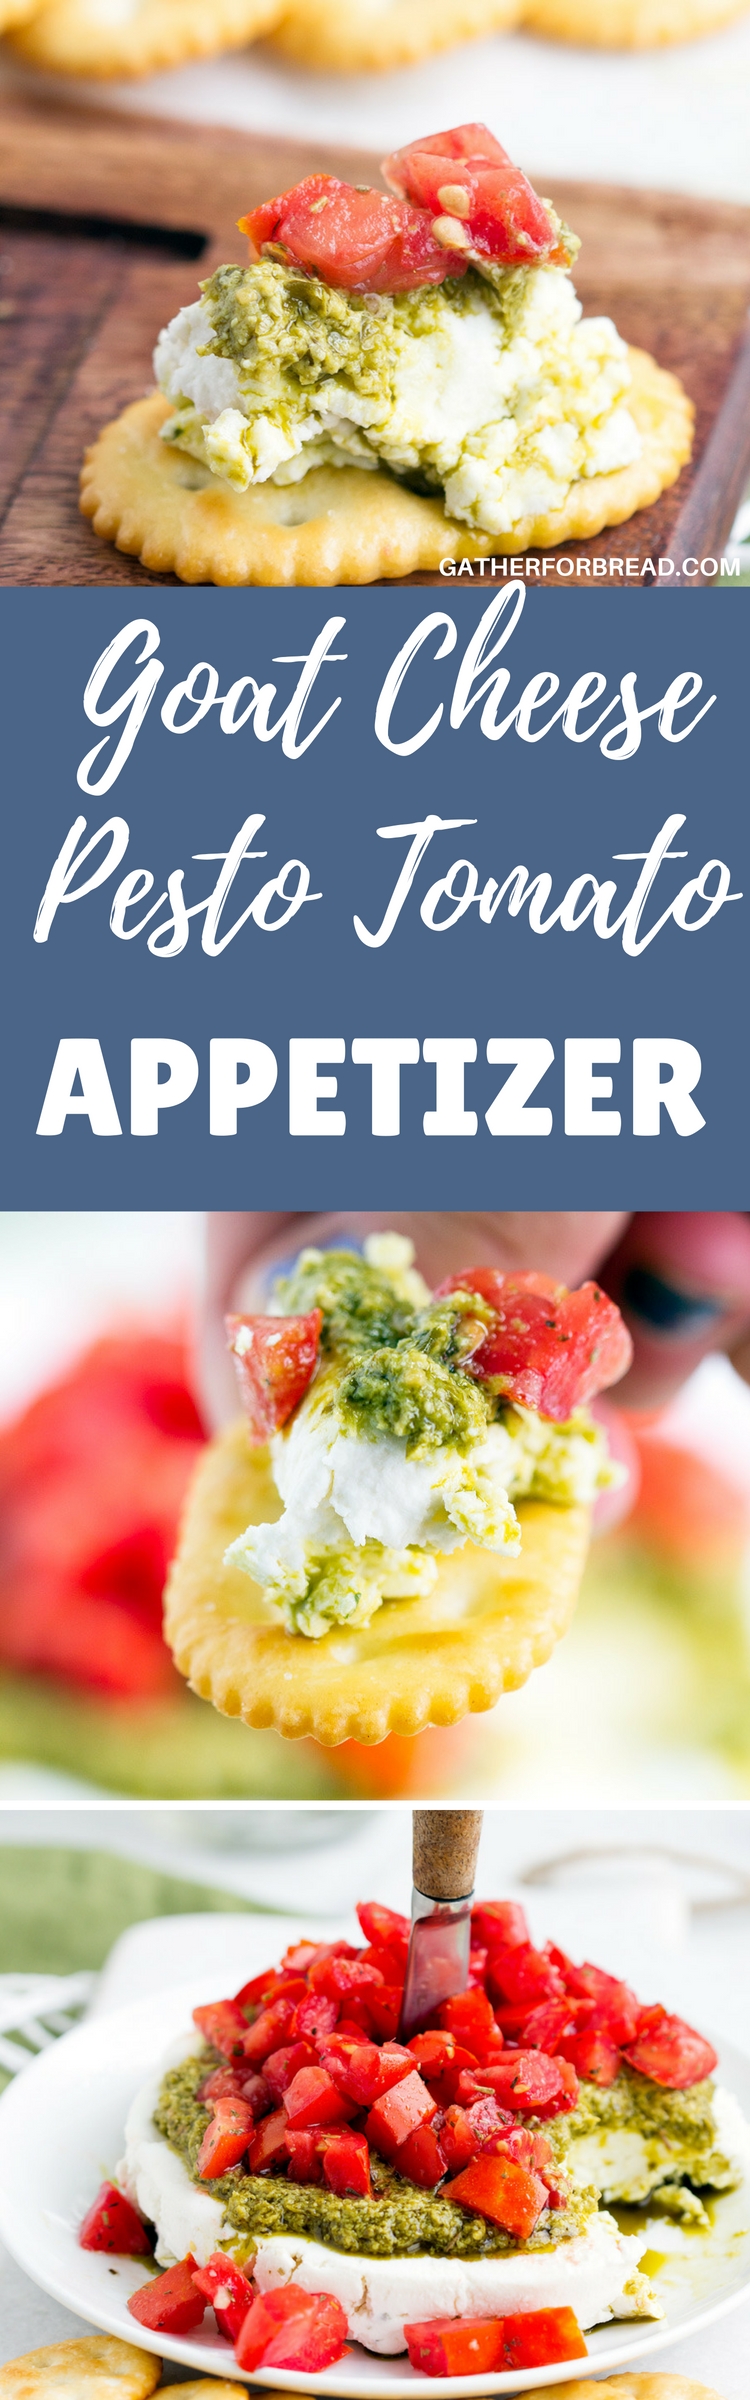 Goat Cheese Pesto Tomato Appetizer - Layers of creamy goat cheese, basil pesto and topped with herb tomatoes. 10 minute layered starter, perfect for parties! 